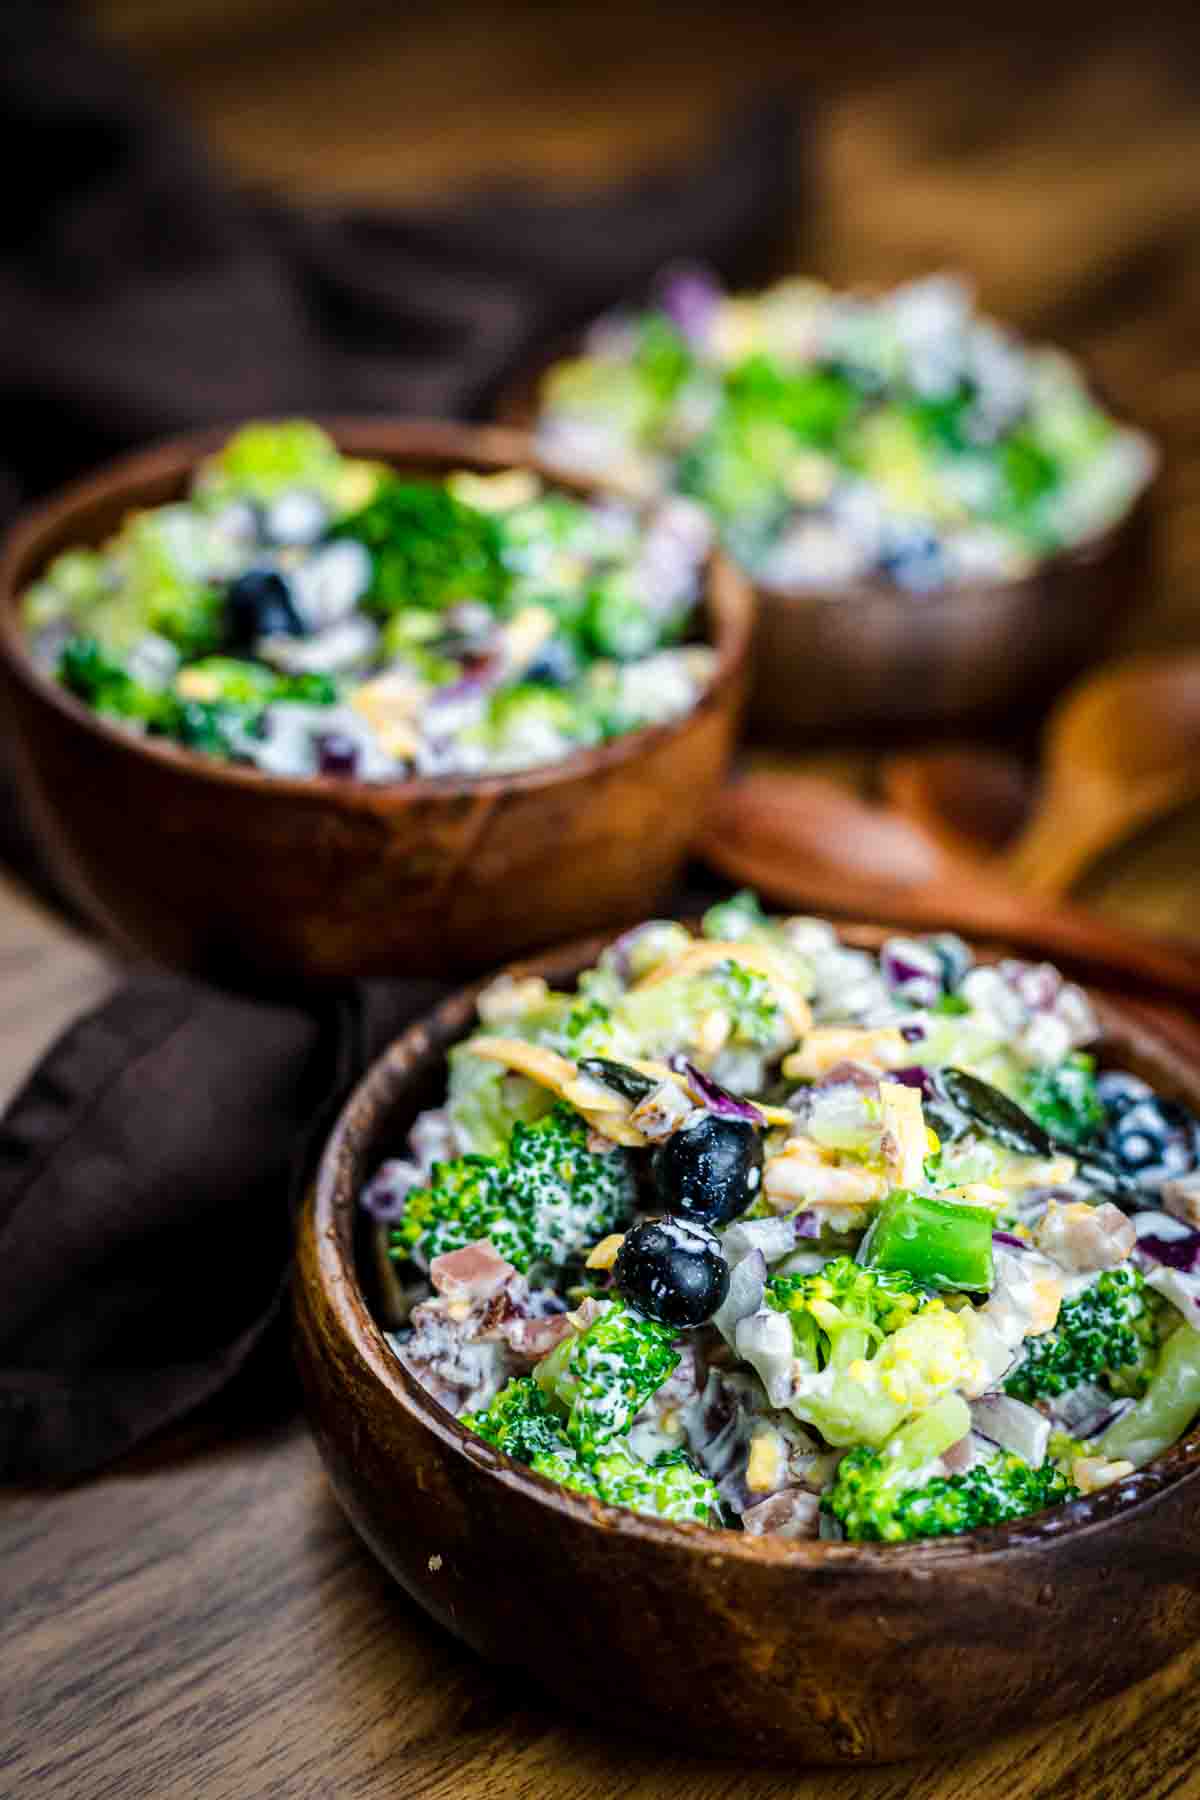 Amish Broccoli Salad in a wooden bowl.